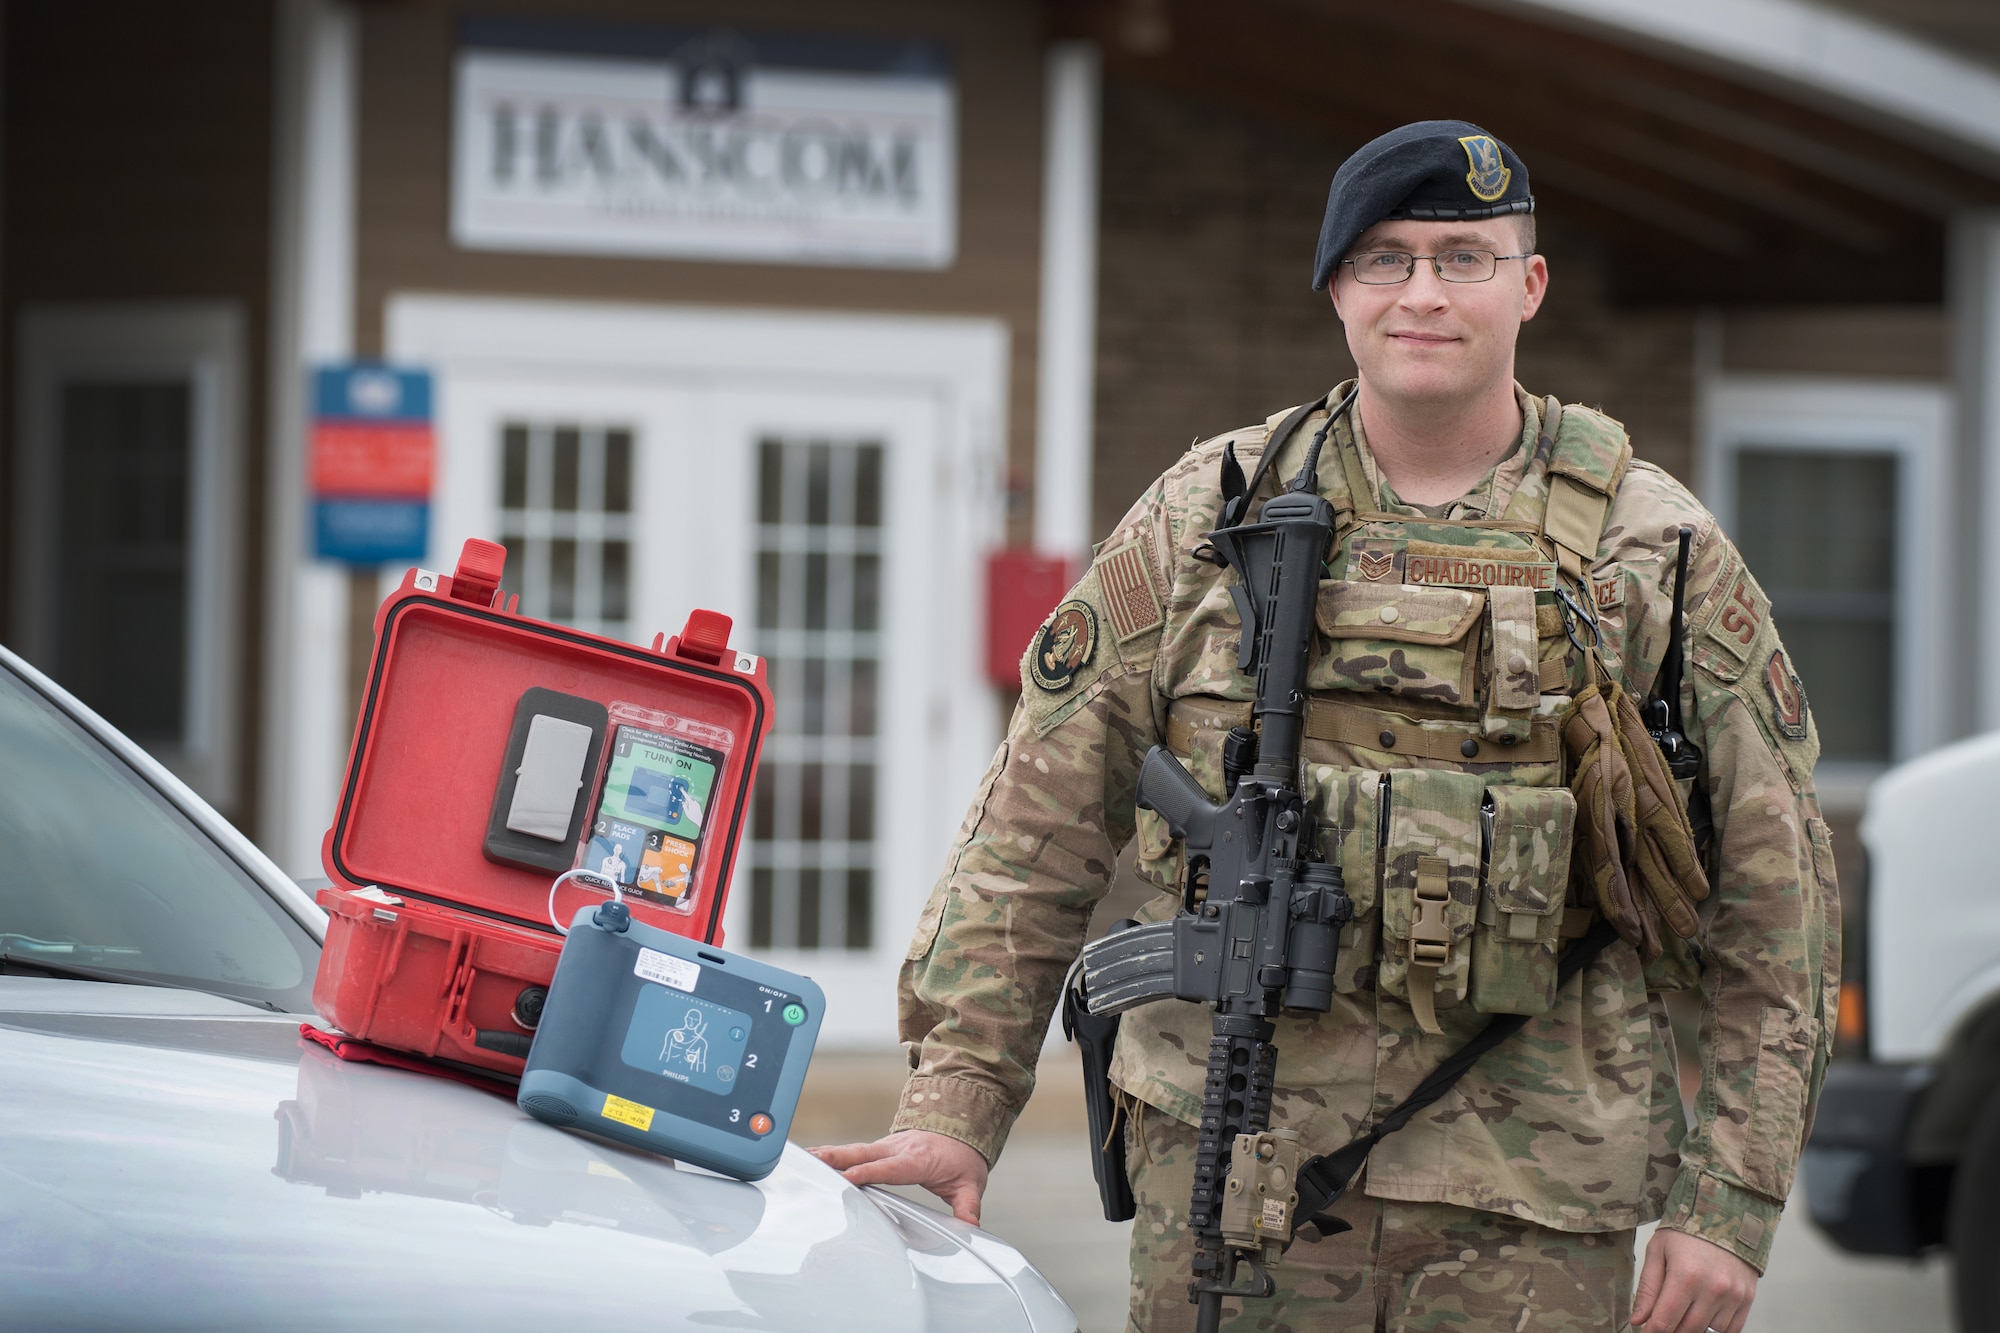 Staff Sgt. Humphrey Chadbourne, 66th Security Forces Squadron patrolman, stands by his cruiser with an automated external defibrillator machine at Hanscom Air Force Base, Mass., March 12. Earlier this year, Chadbourne was the first to respond to a medical emergency where his rapid and decisive actions ultimately saved the life of a contractor who suffered a heart attack on base.  (U.S. Air Force photo by Jerry Saslav)